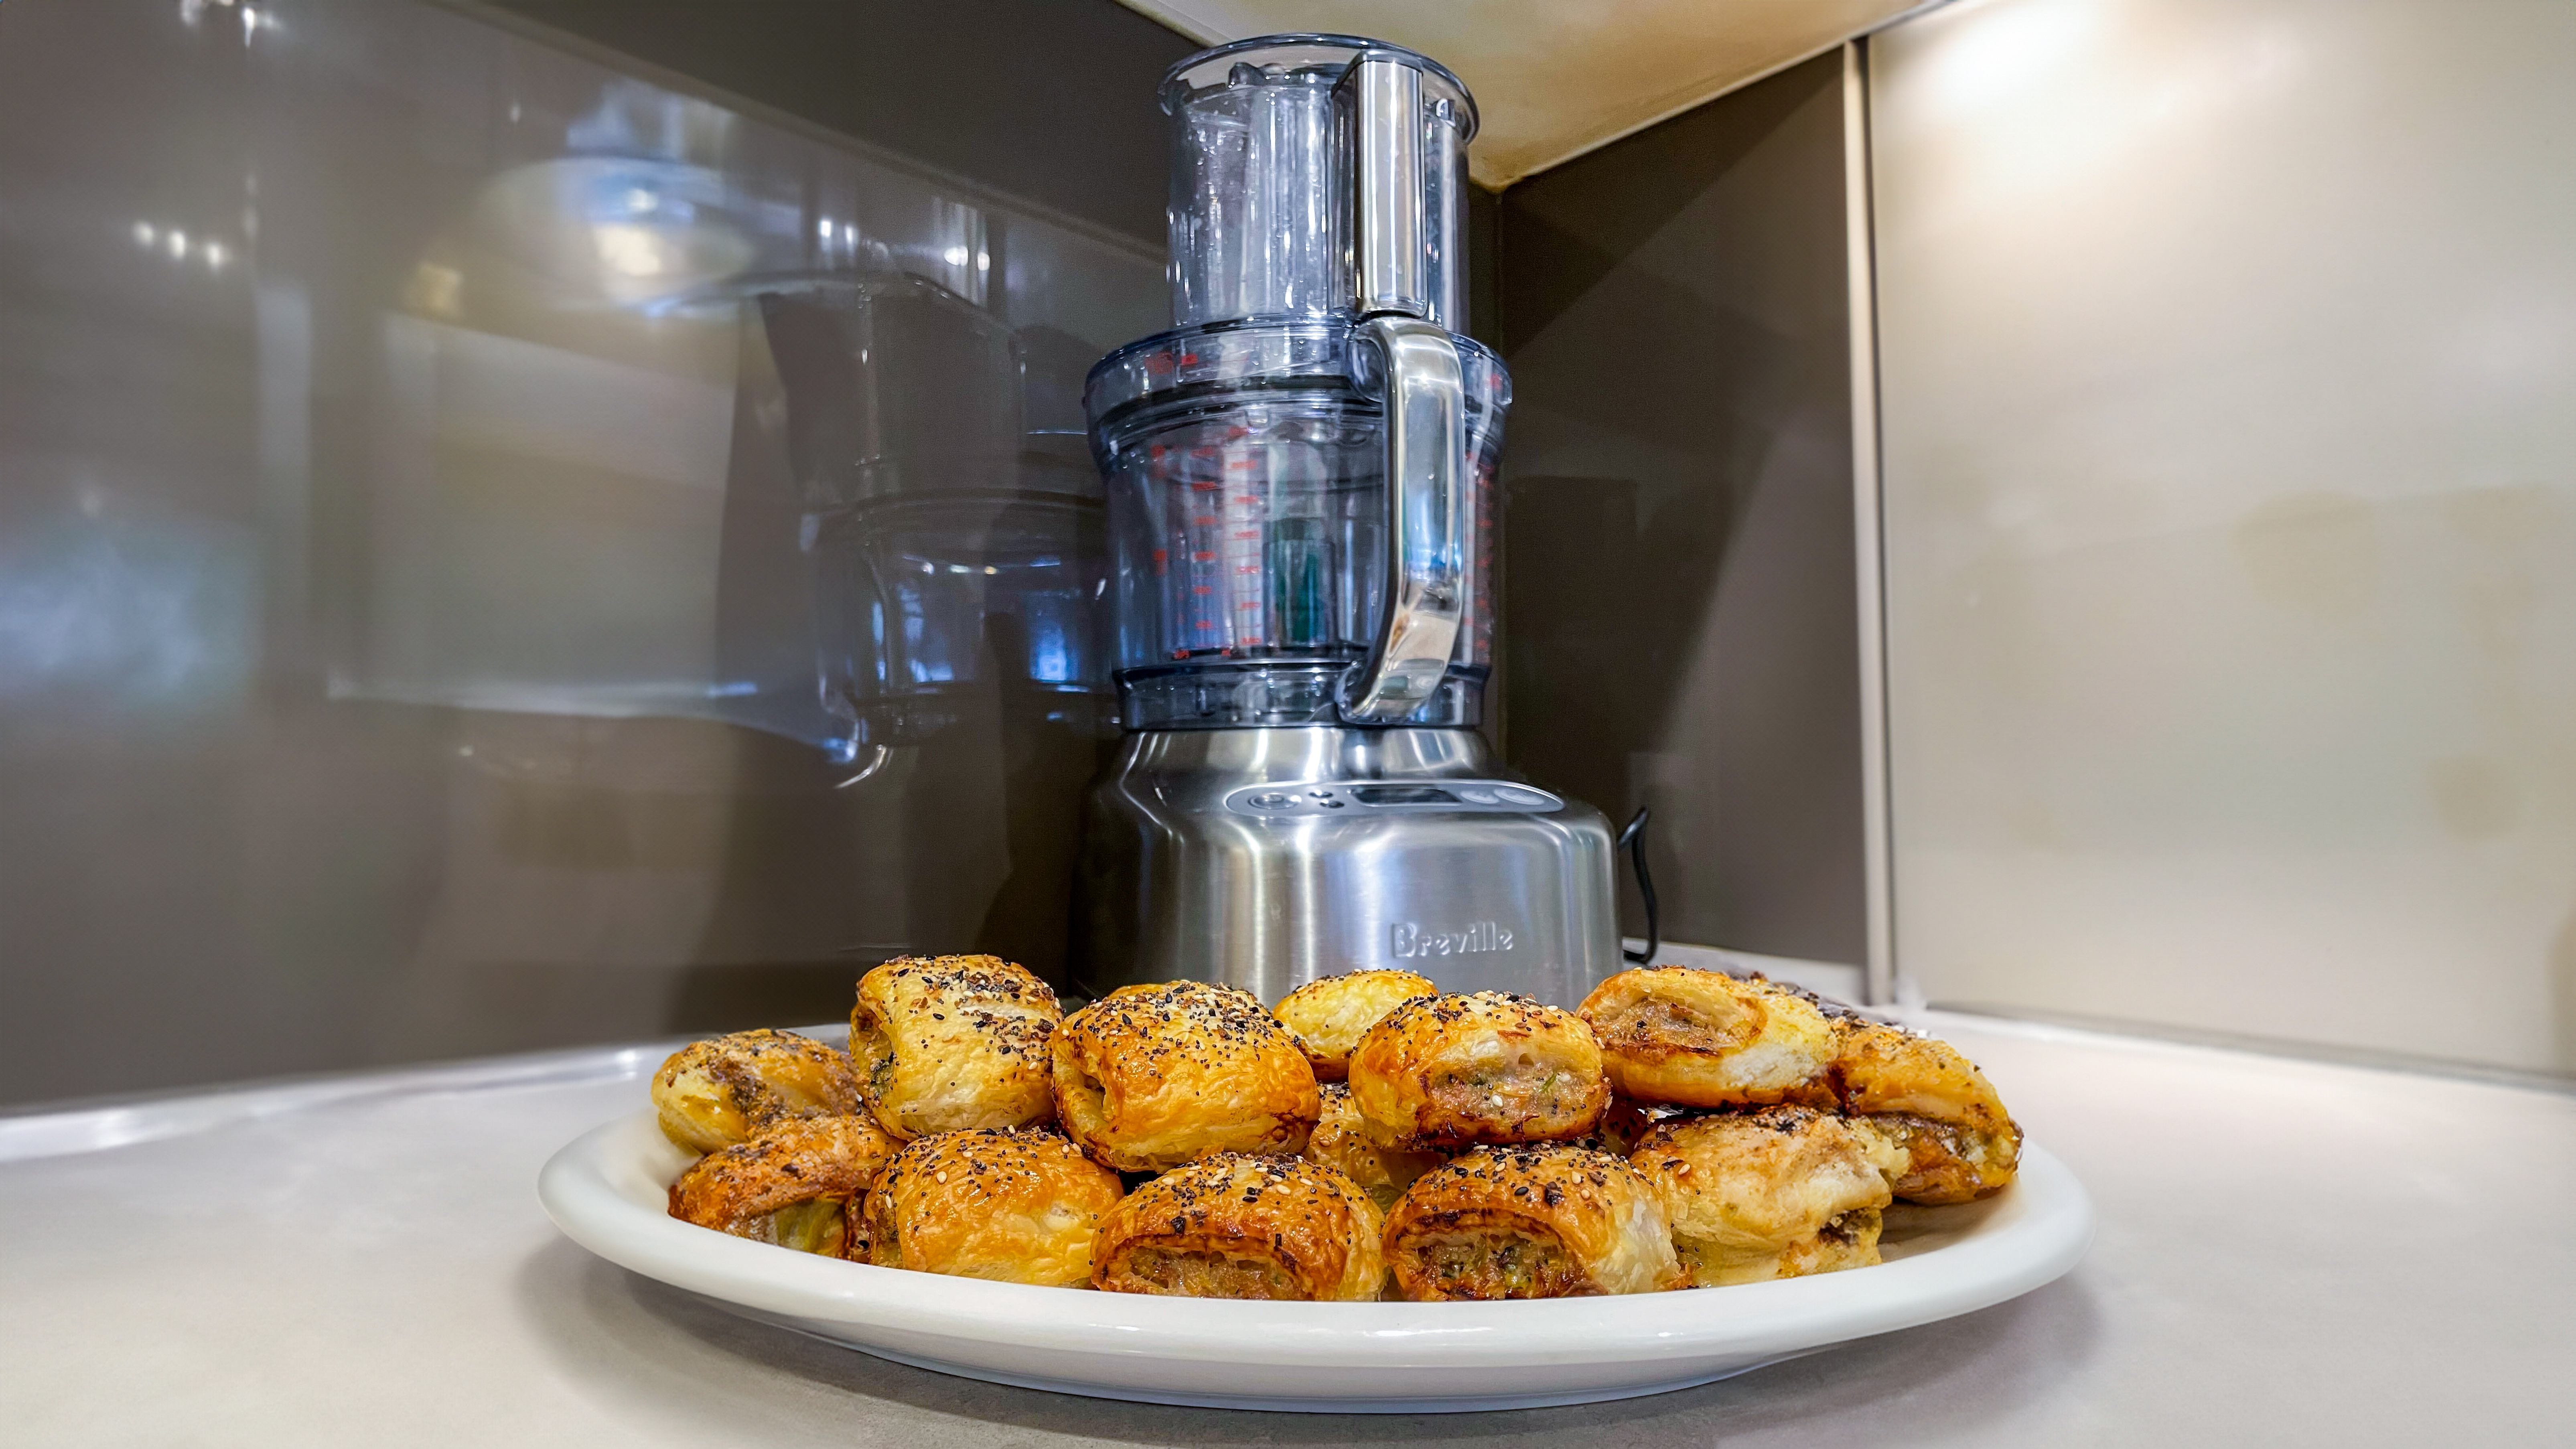 A plate of homemade sausage rolls in front of the Breville Paradice 16 food processor